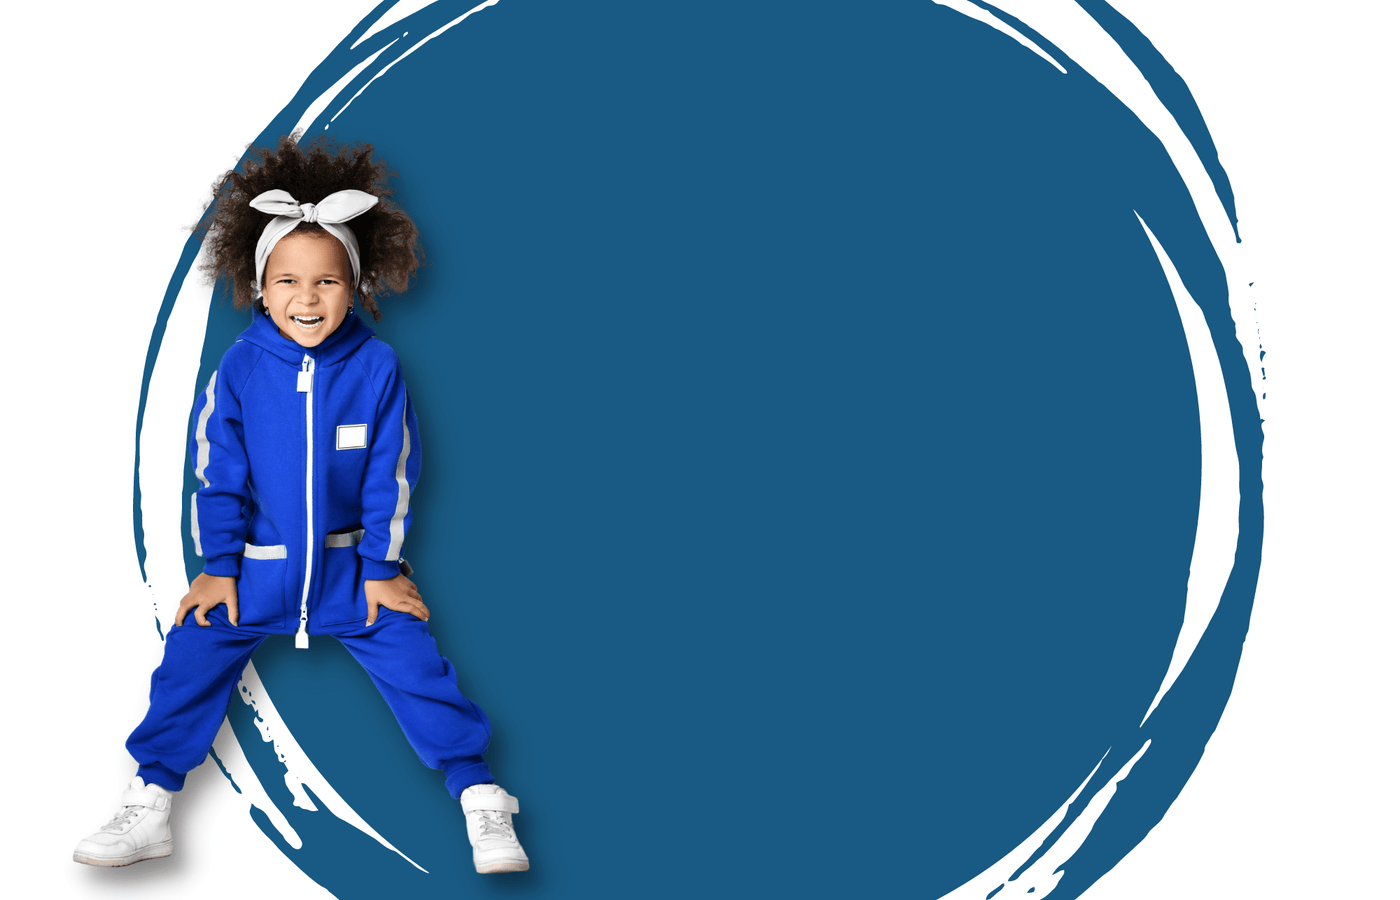 A young female, wearing a bright blue tracksuit, has her hands on her legs and is smiling. The background has a large dark blue paint splat over a light grey backdrop.